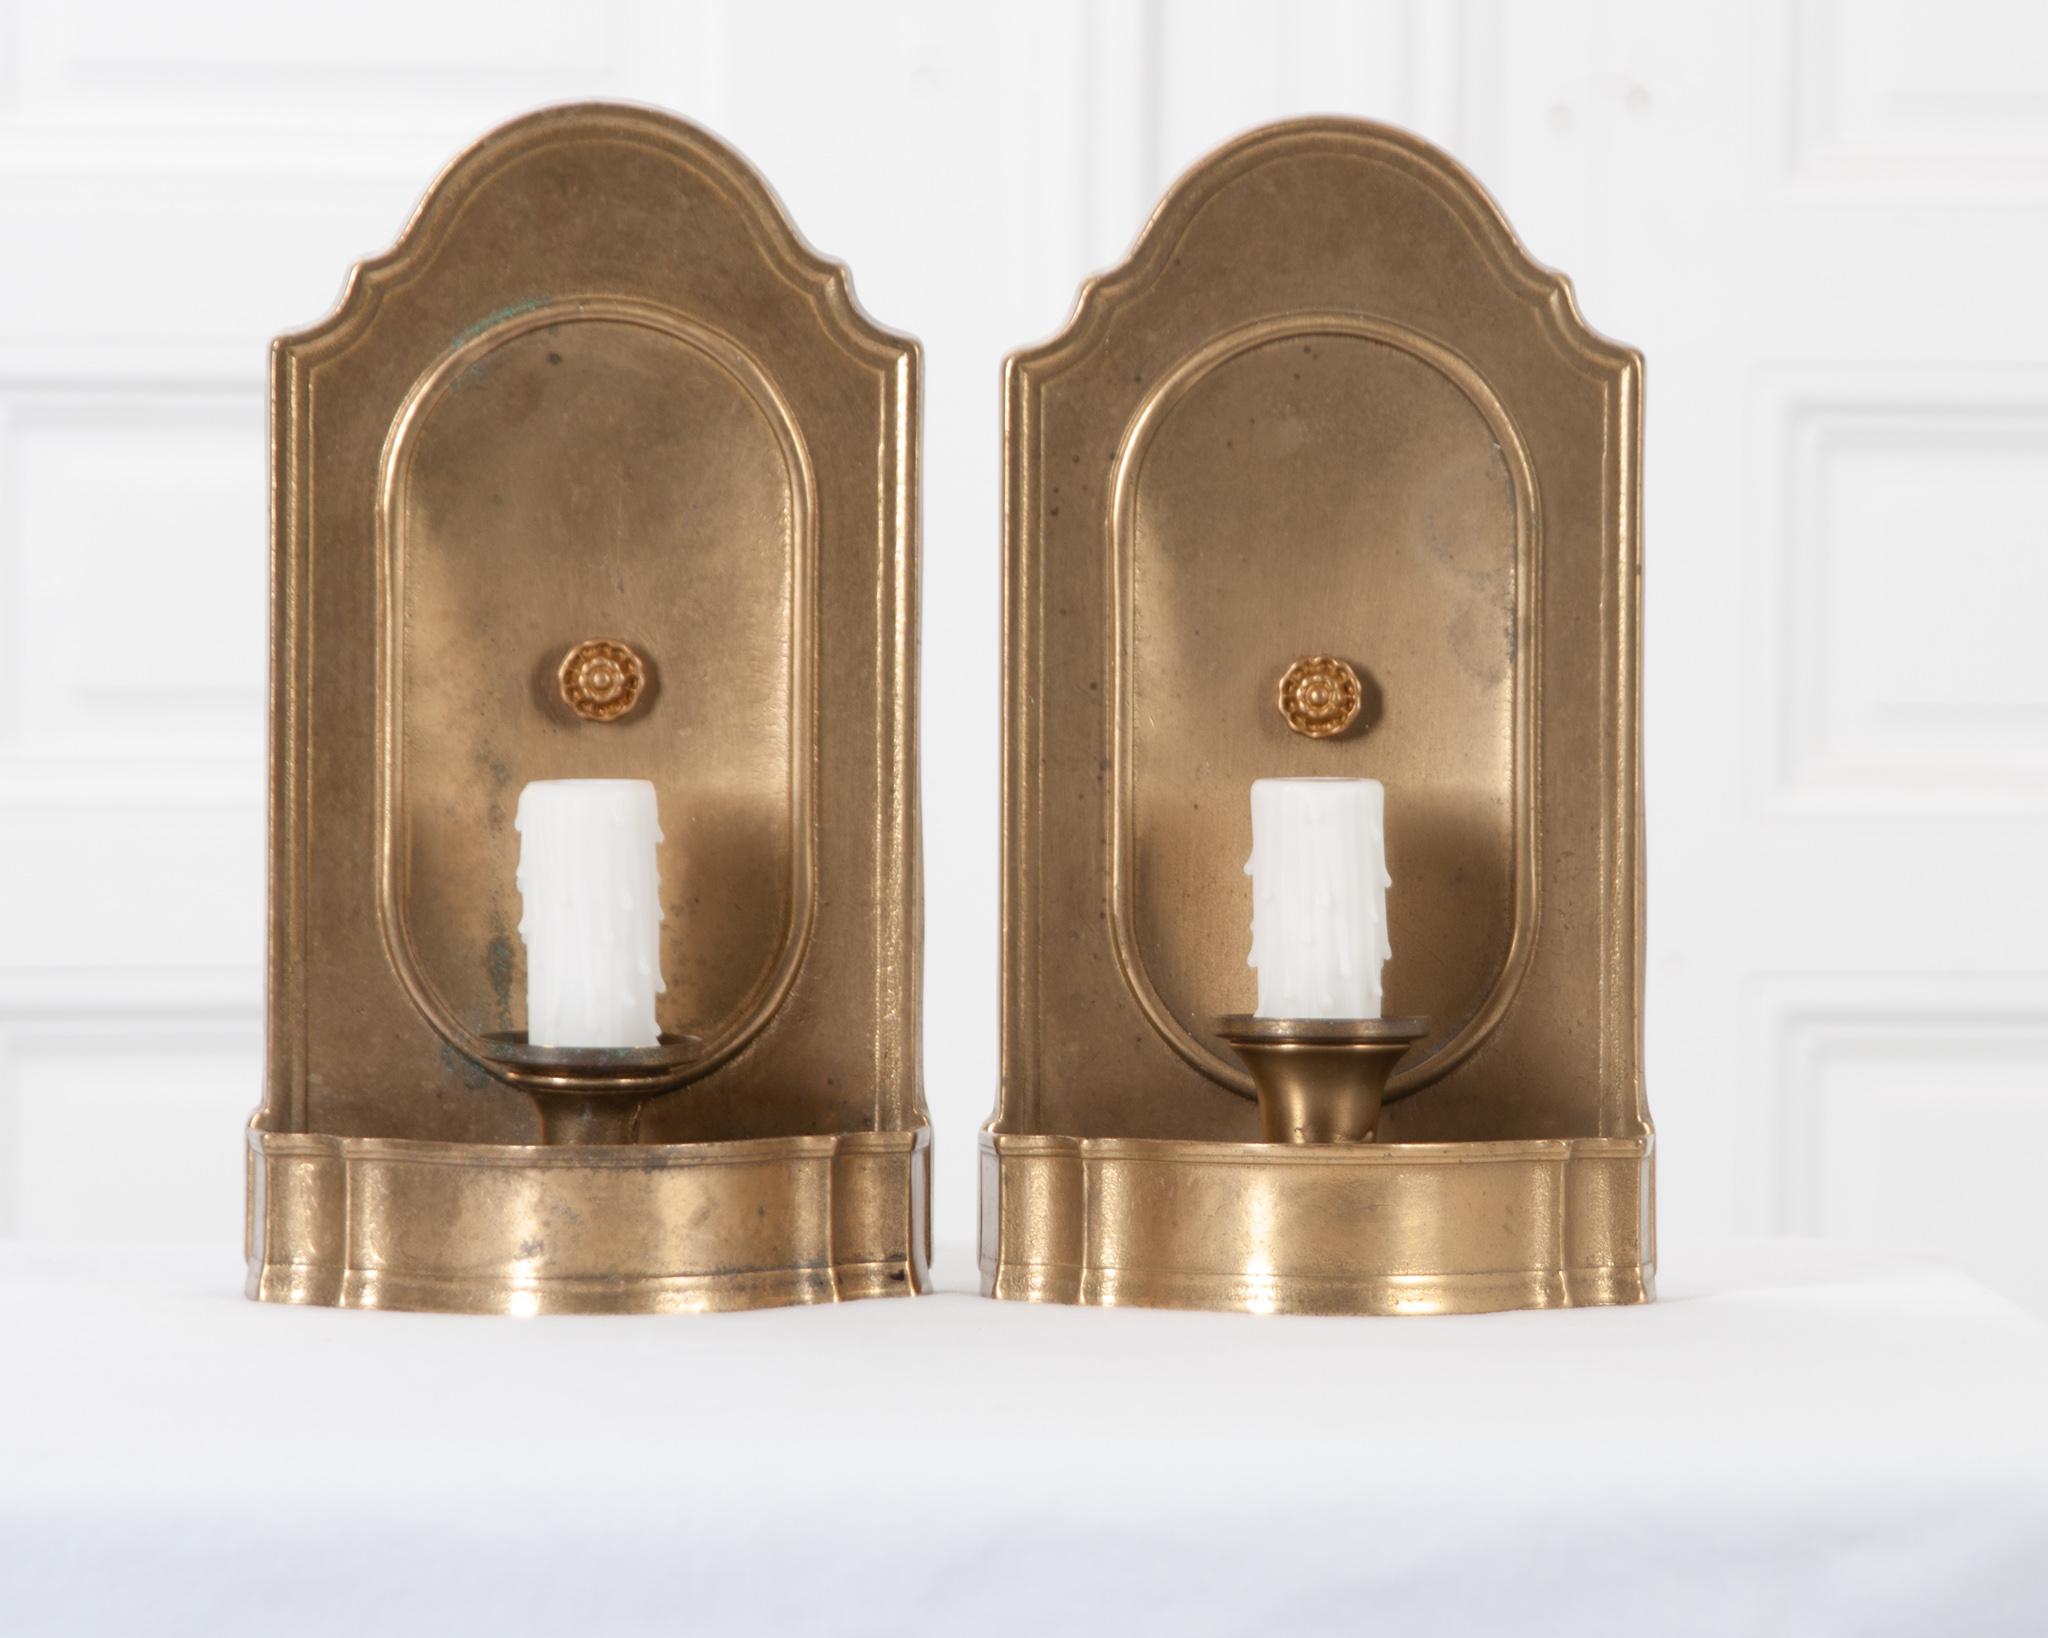 A refined pair of electrified candle sconce from 19th century France. The brass has gained a delightful patina over the years without taking away from the impressive luster. A small but detailed rosette is featured in the center of the sconce, which